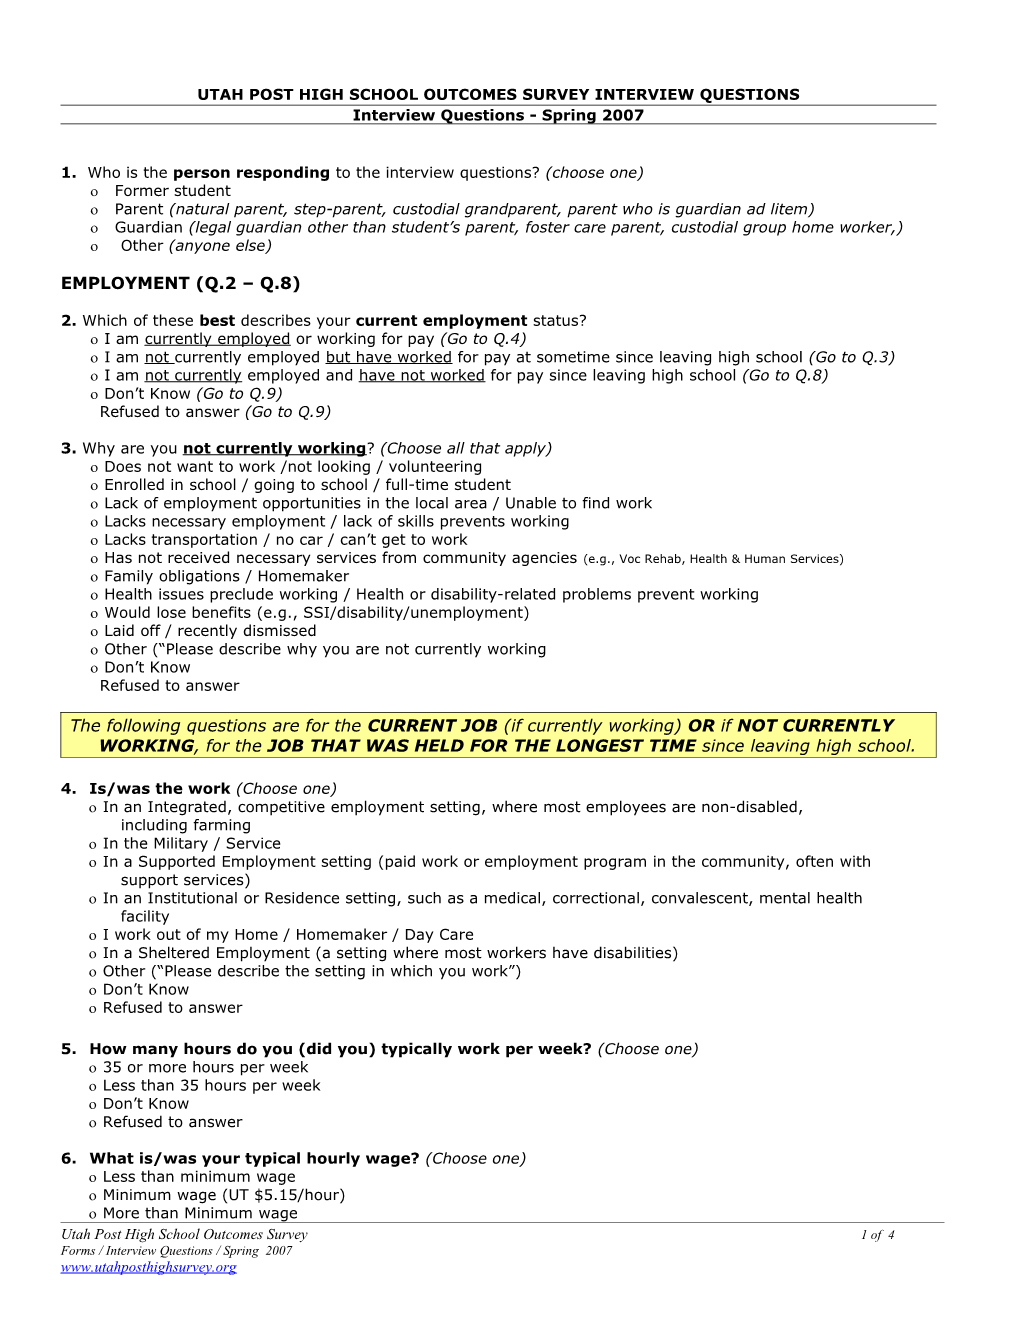 11/11/05 Draft Proposal for Changing Questions to Work with Exit Interview